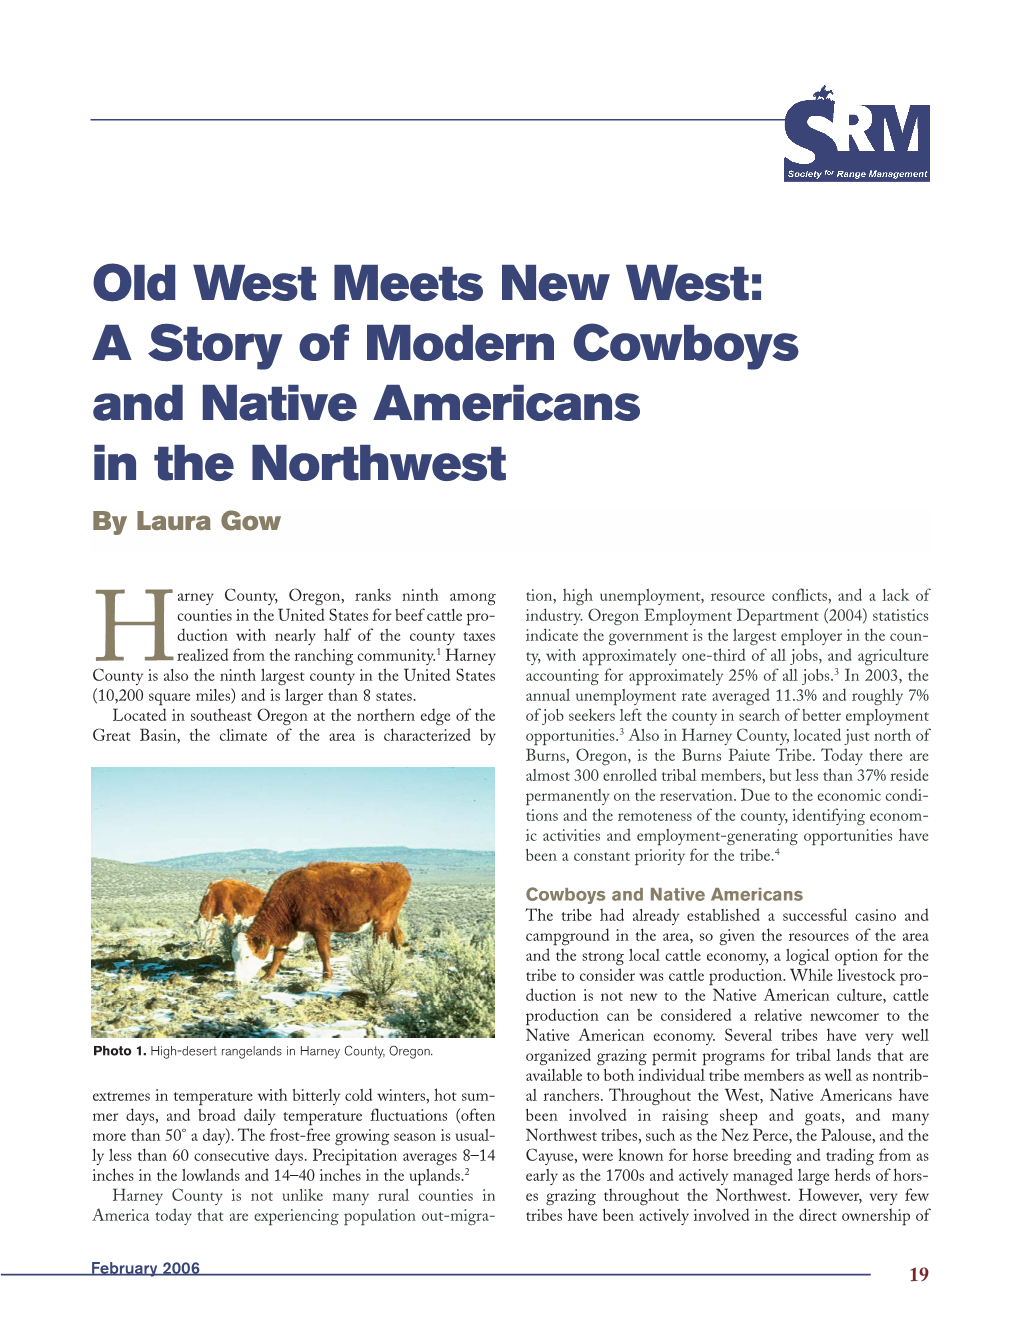 A Story of Modern Cowboys and Native Americans in the Northwest by Laura Gow